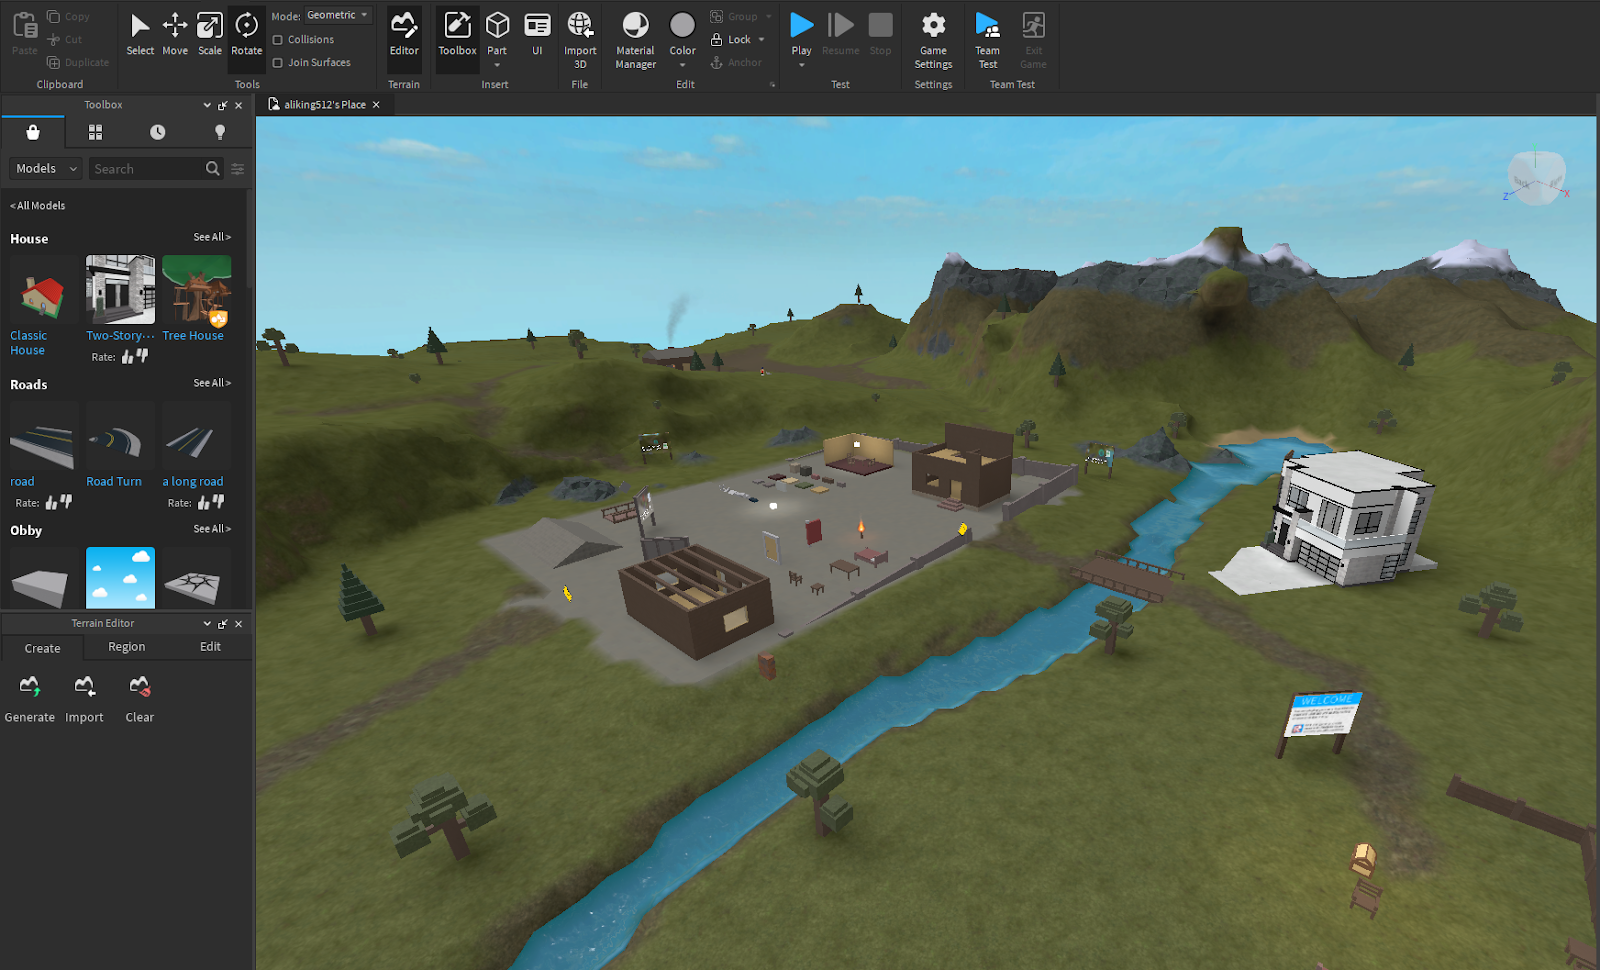 Terrain Editor popping up during testing or opening up Roblox